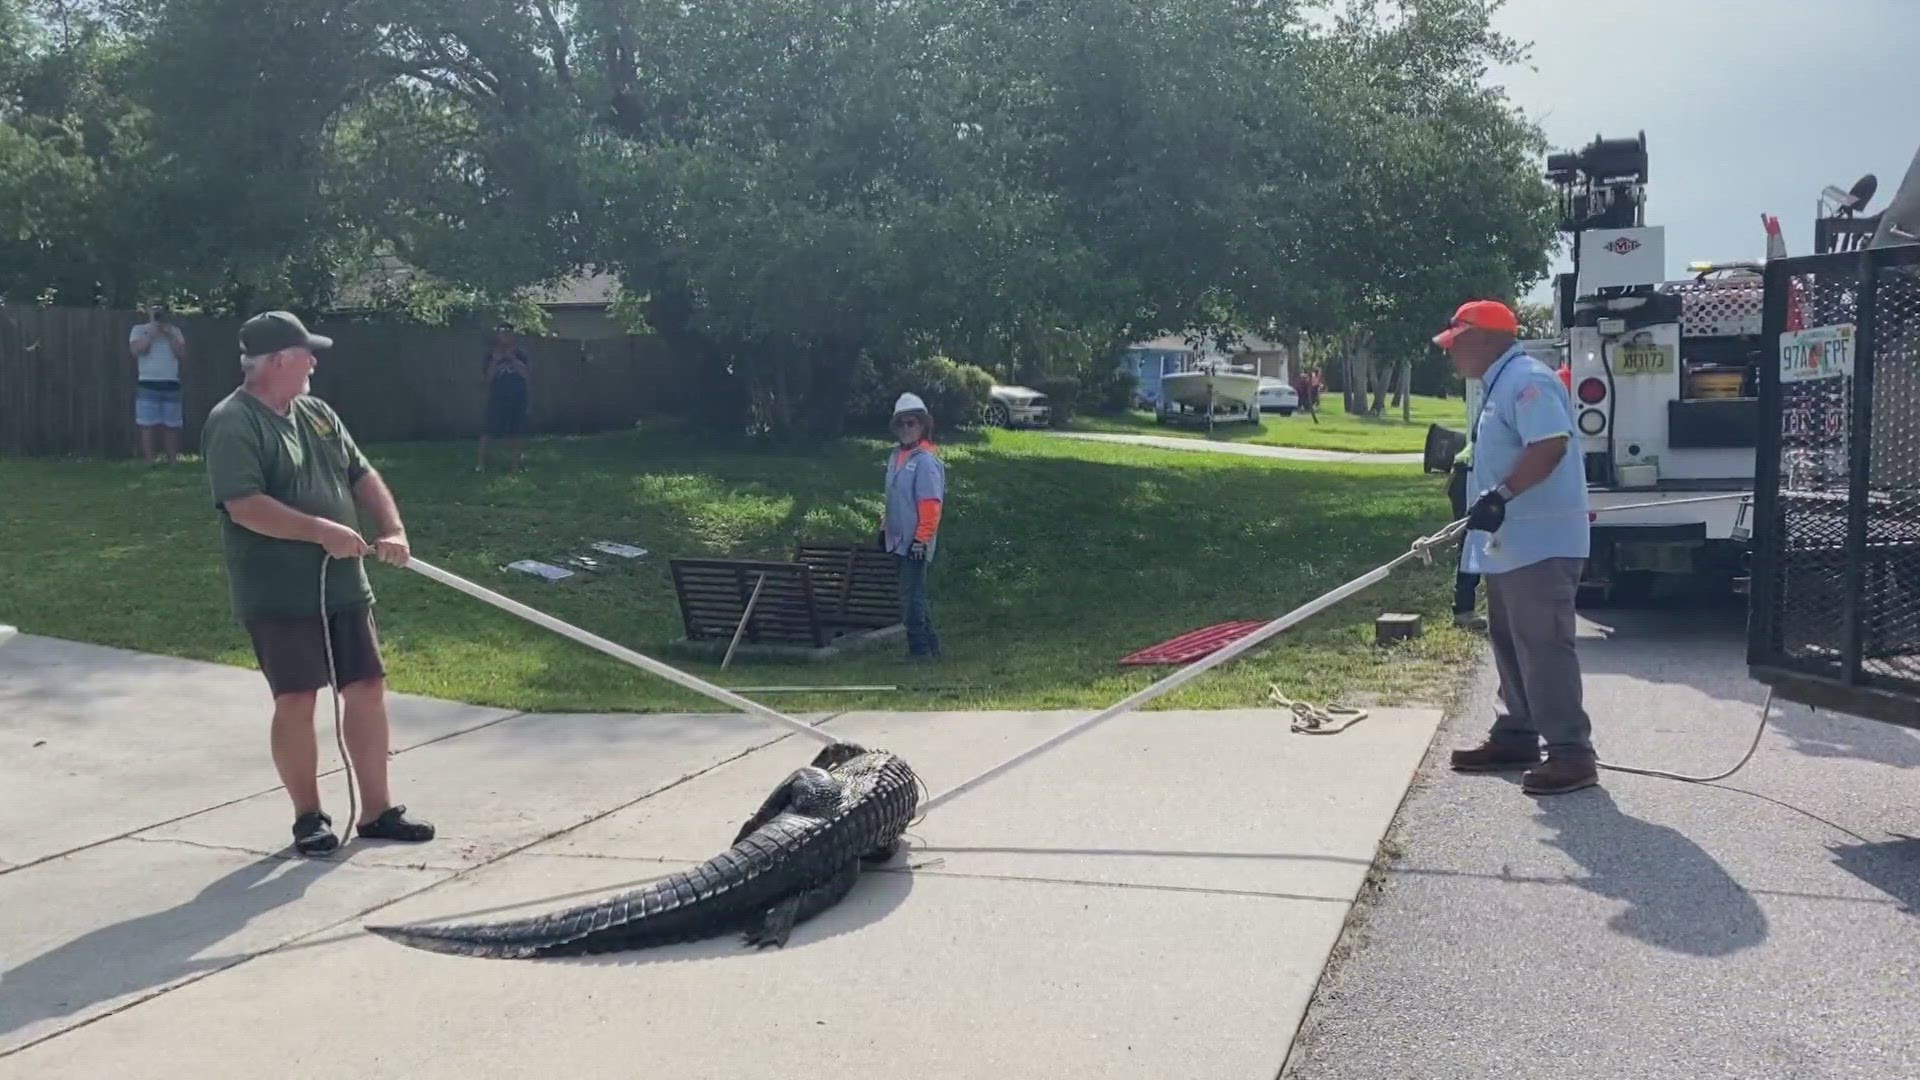 Wildlife workers pulled an 8-foot alligator out of a storm drain pipe in the front yard of a home in Cape Coral.